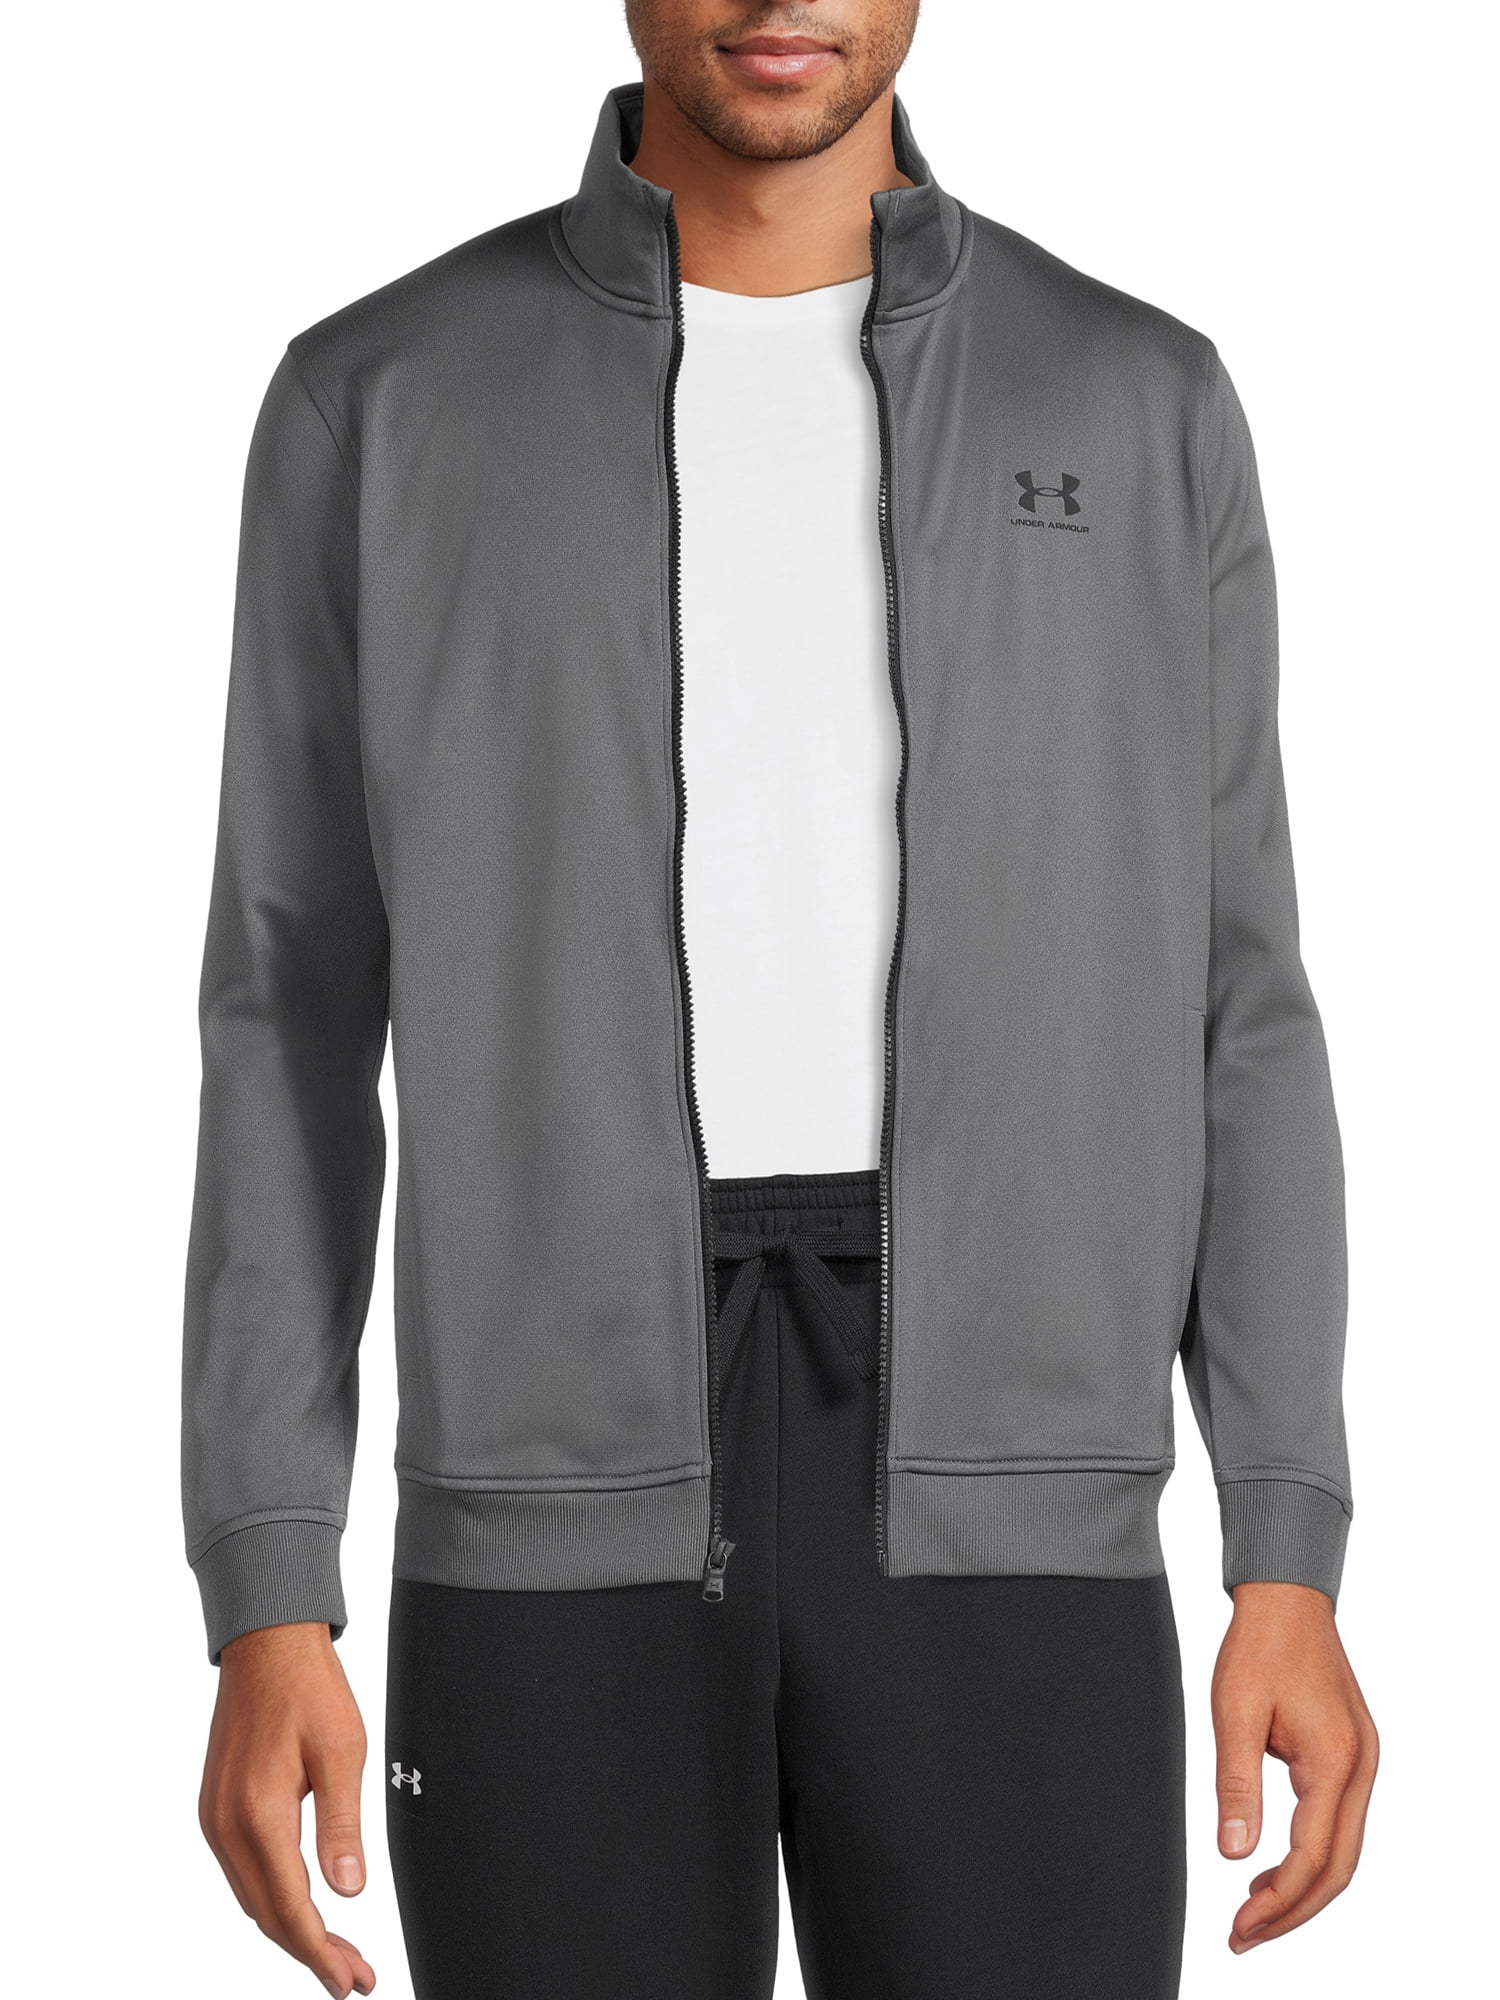 Under Armour Men's and Big Men's UA Sportstyle Tricot Track Jacket, up to  size 2XL